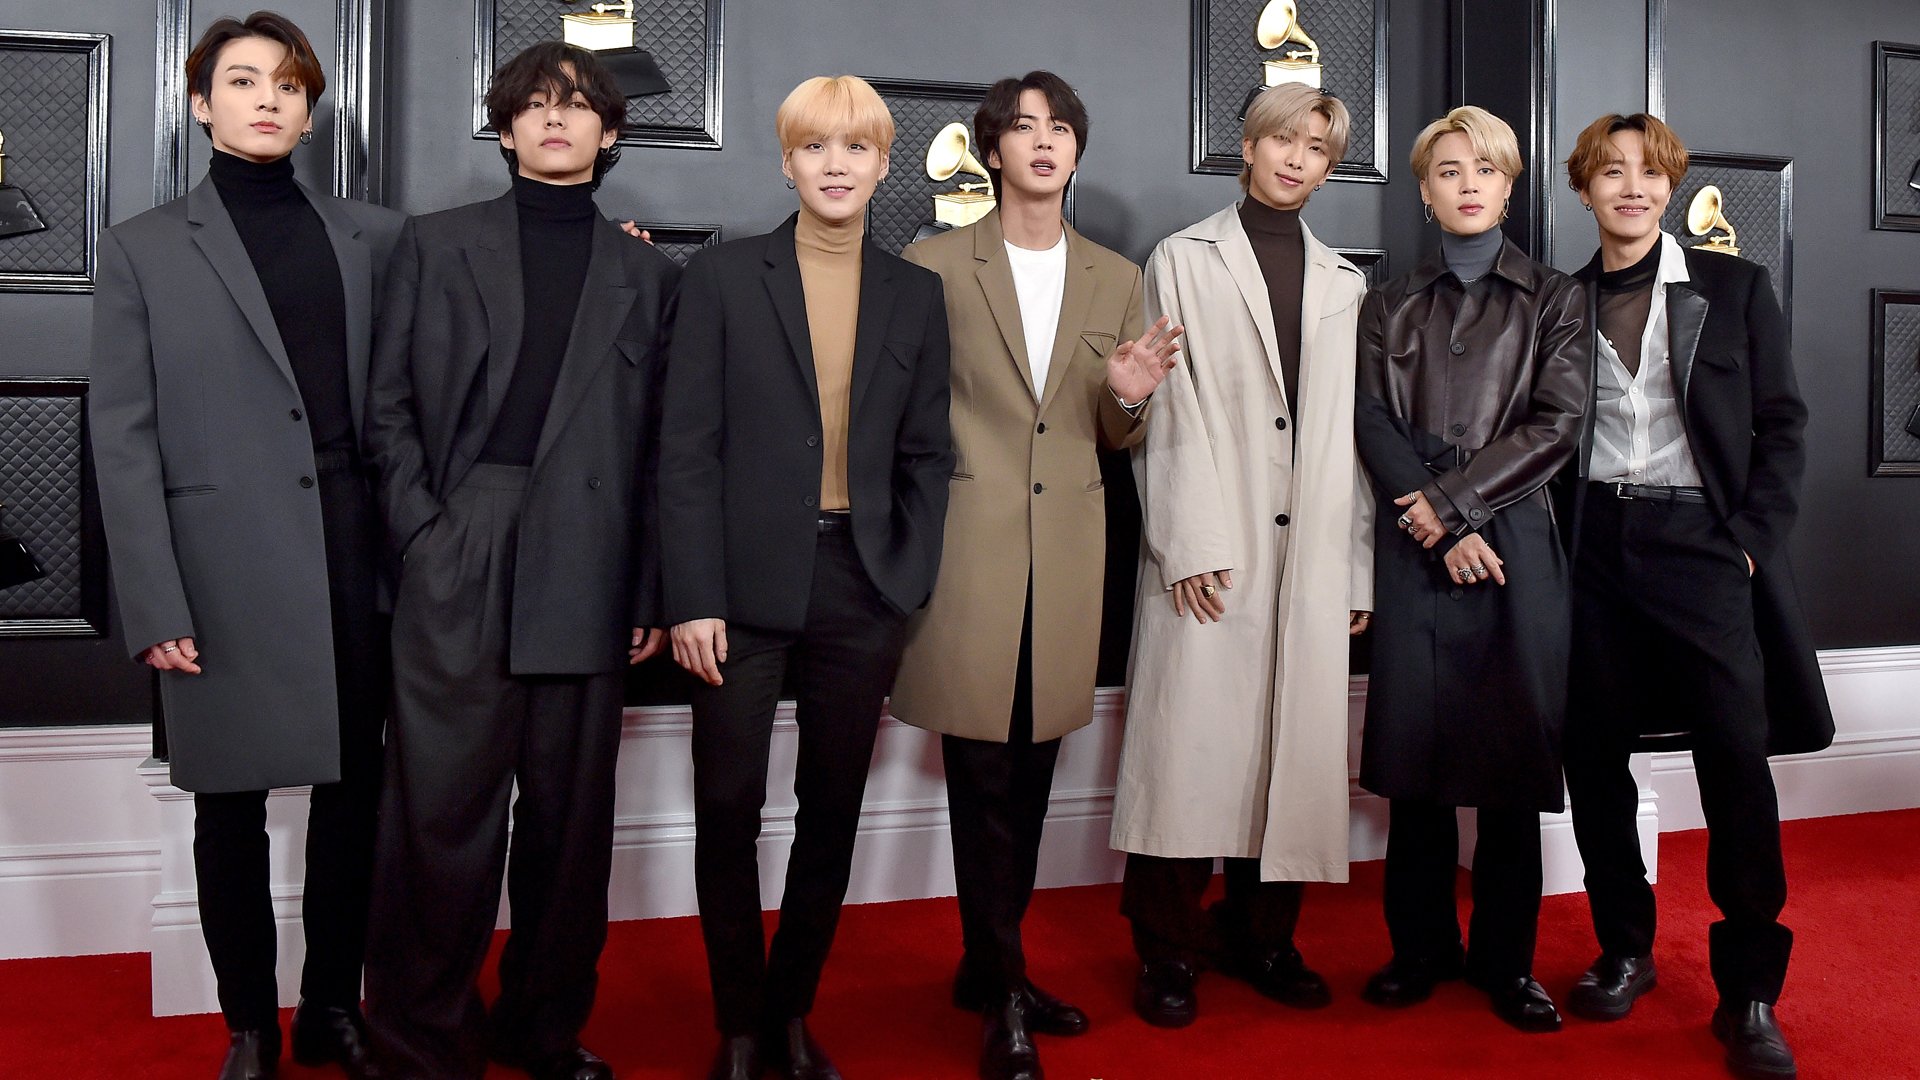 Jungkook, V, Suga, Jin, RM, Jimin and J-Hope of music group BTS attend the 62nd Annual GRAMMY Awards at Staples Center on January 26, 2020 in Los Angeles, California.